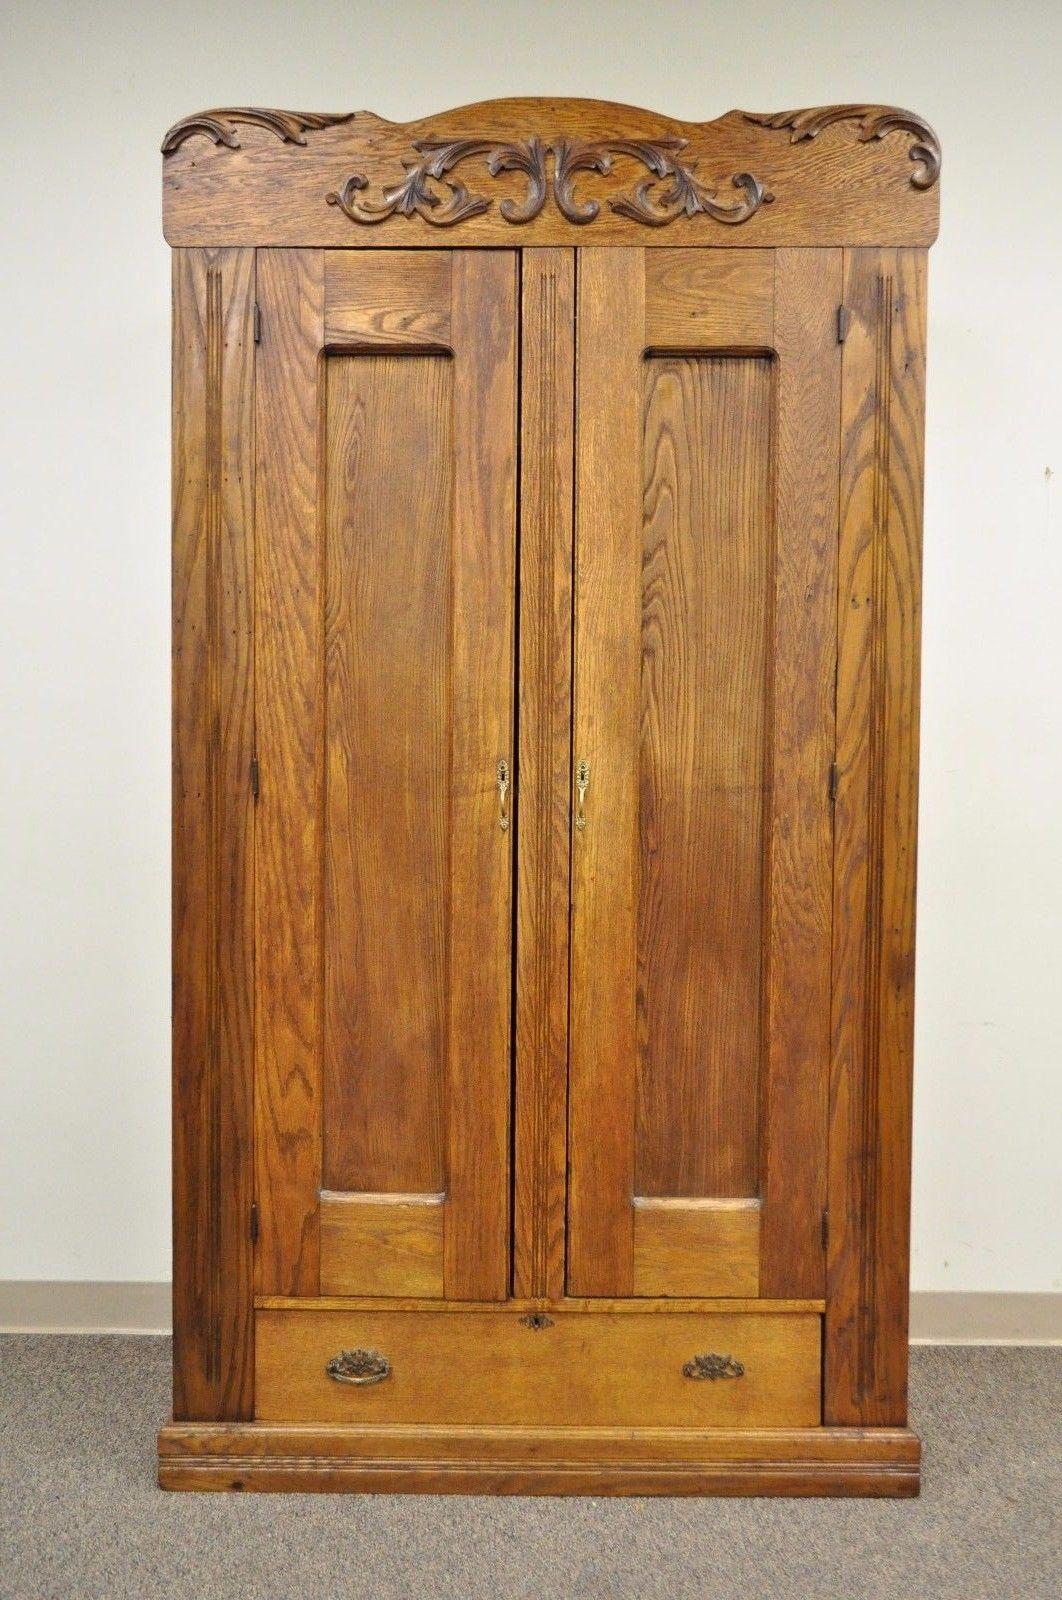 Tall Antique American victorian golden oakwood wardrobe. Item features solid oakwood construction, applied carved wood accents, single Drawer, two swing doors, interior shelf, brass hardware, paneled back, tall stately form, true antique wardrobe,